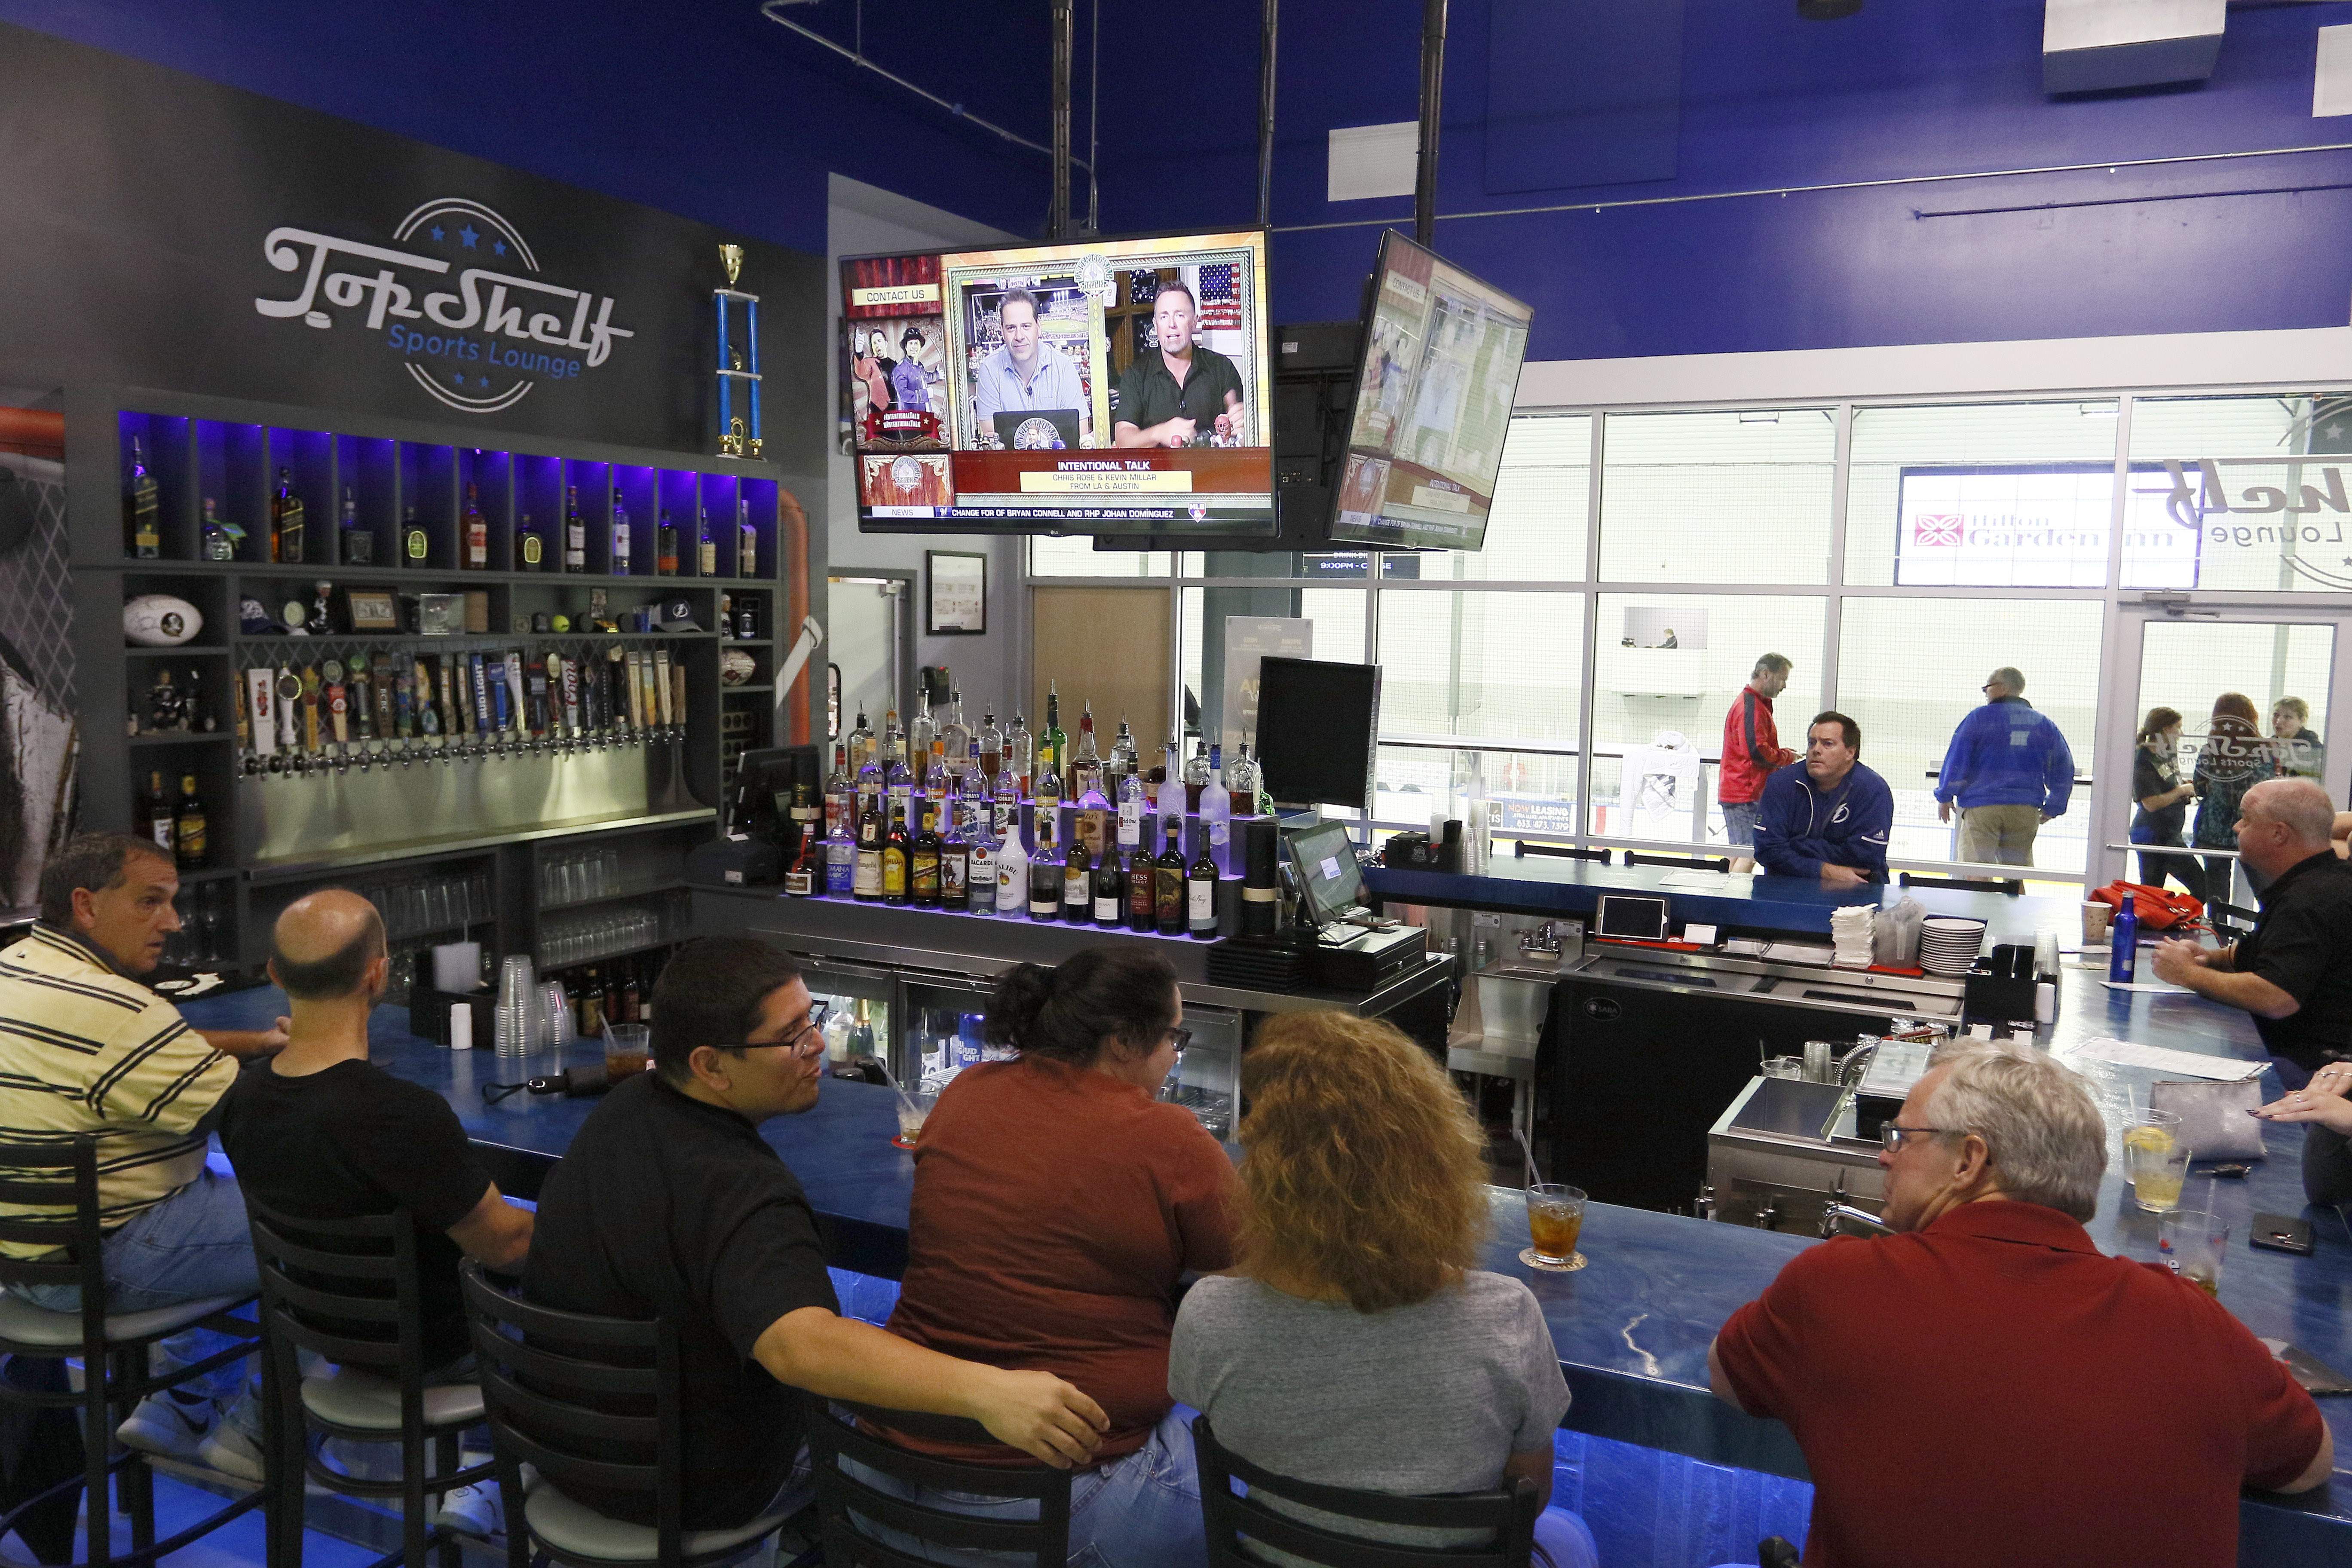 Bar review: At Top Shelf Sports Lounge, beer comes with side of hockey rinks